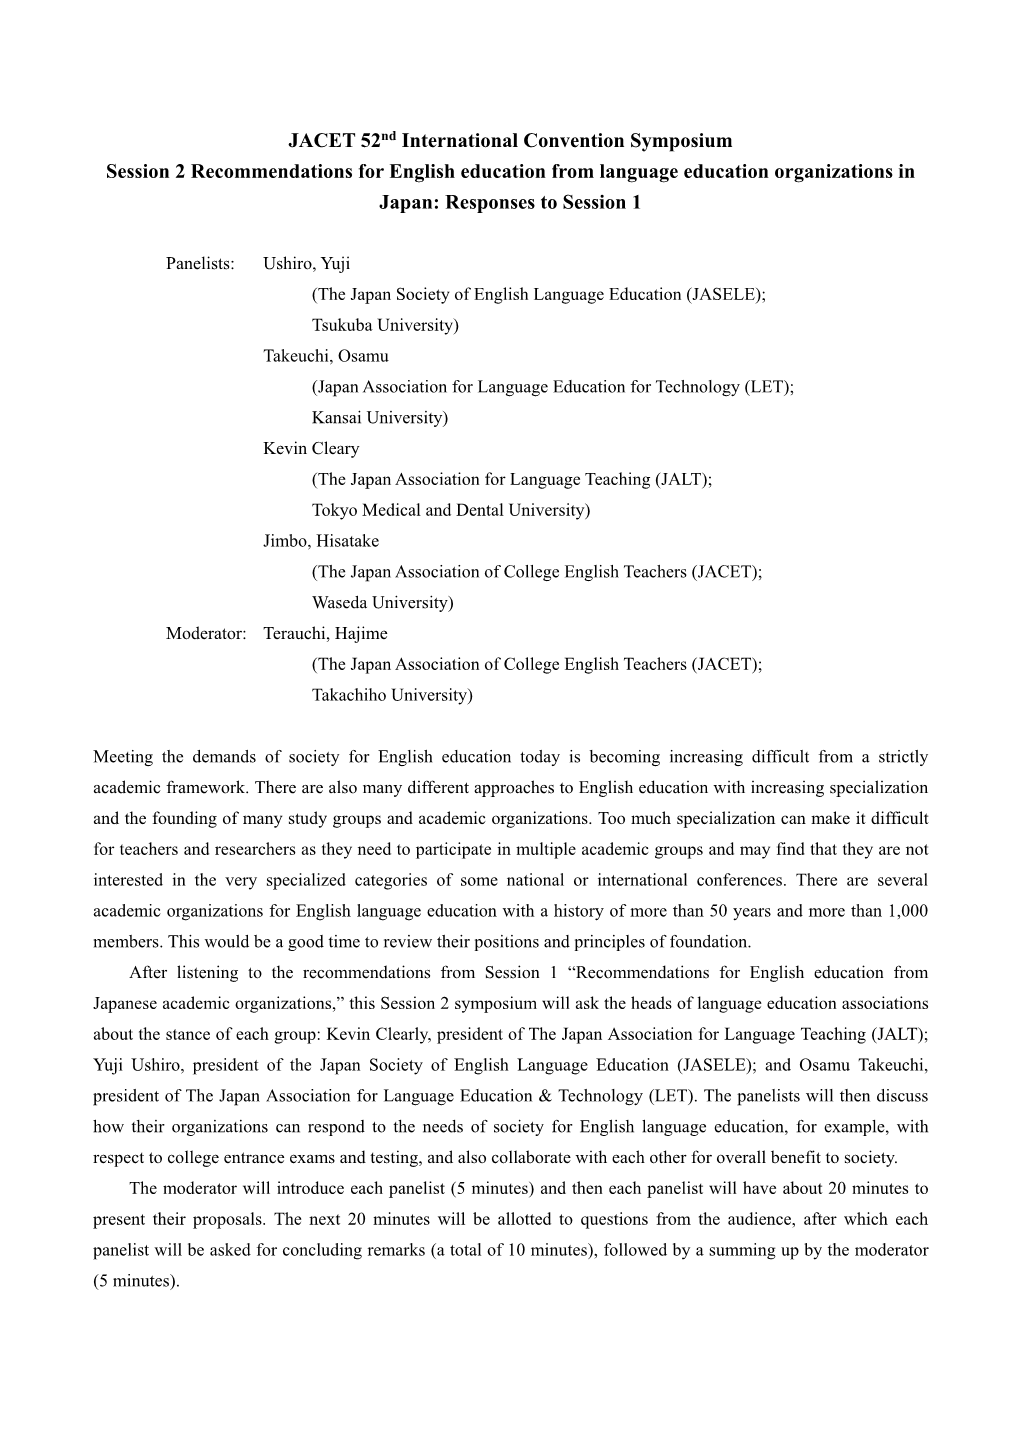 JACET 52Nd International Convention Symposium Session 2 Recommendations for English Education from Language Education Organizations in Japan: Responses to Session 1